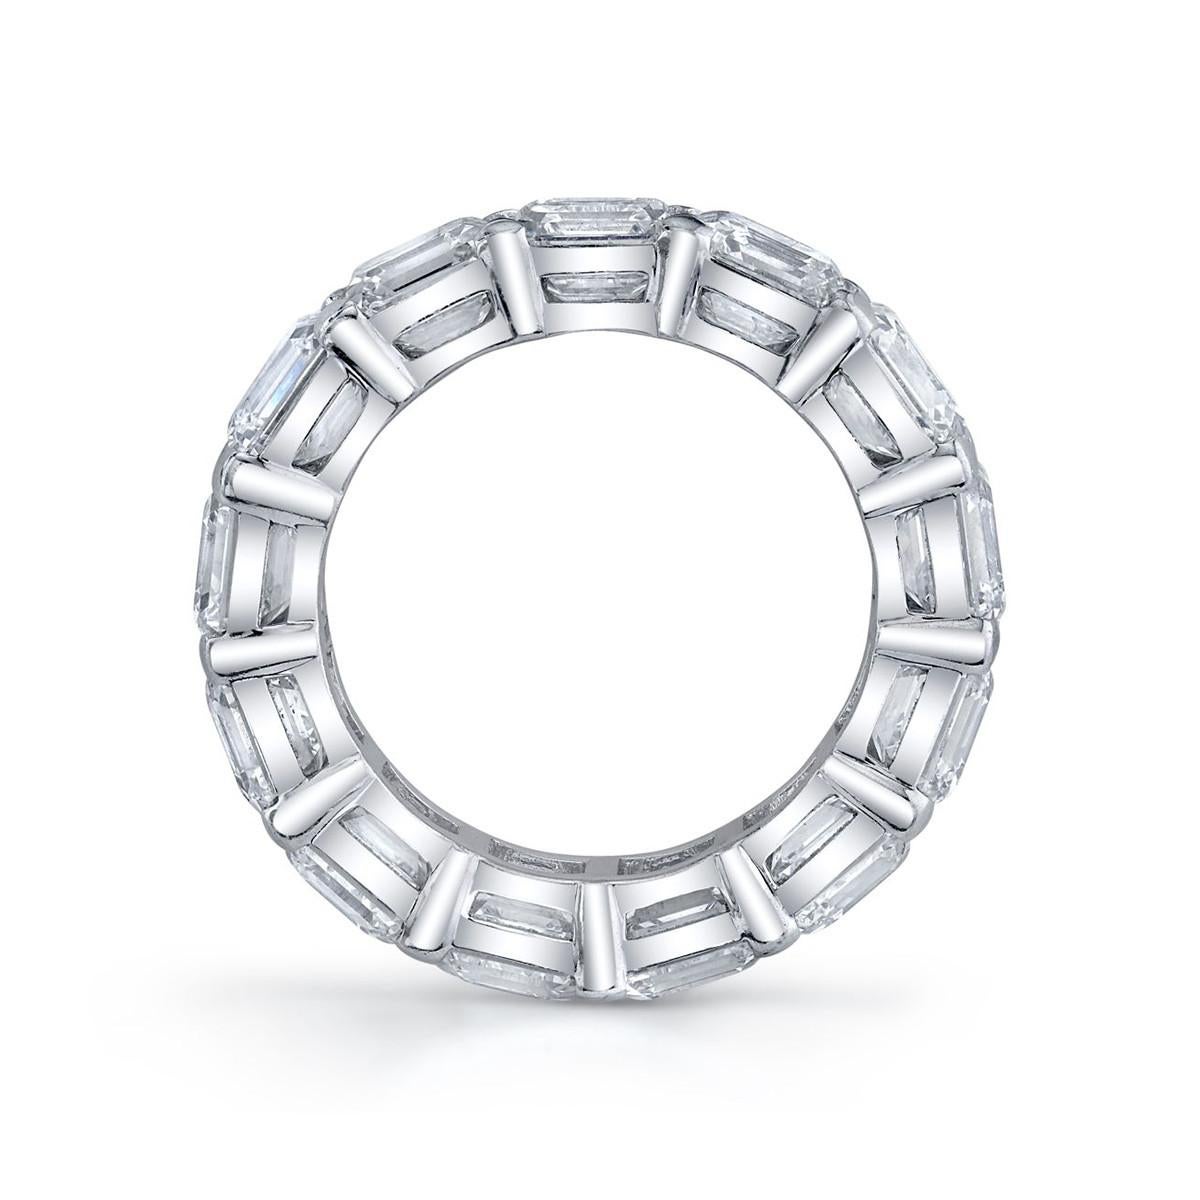 Diamond eternity band ring, featuring asscher-cut diamonds set in a shared prong platinum setting.

Thirteen diamonds weighing 13.24 total carats (D-E color, VVS1-VS1 clarity)
Accompanied by the GIA certificate for each diamond
Size 7.5